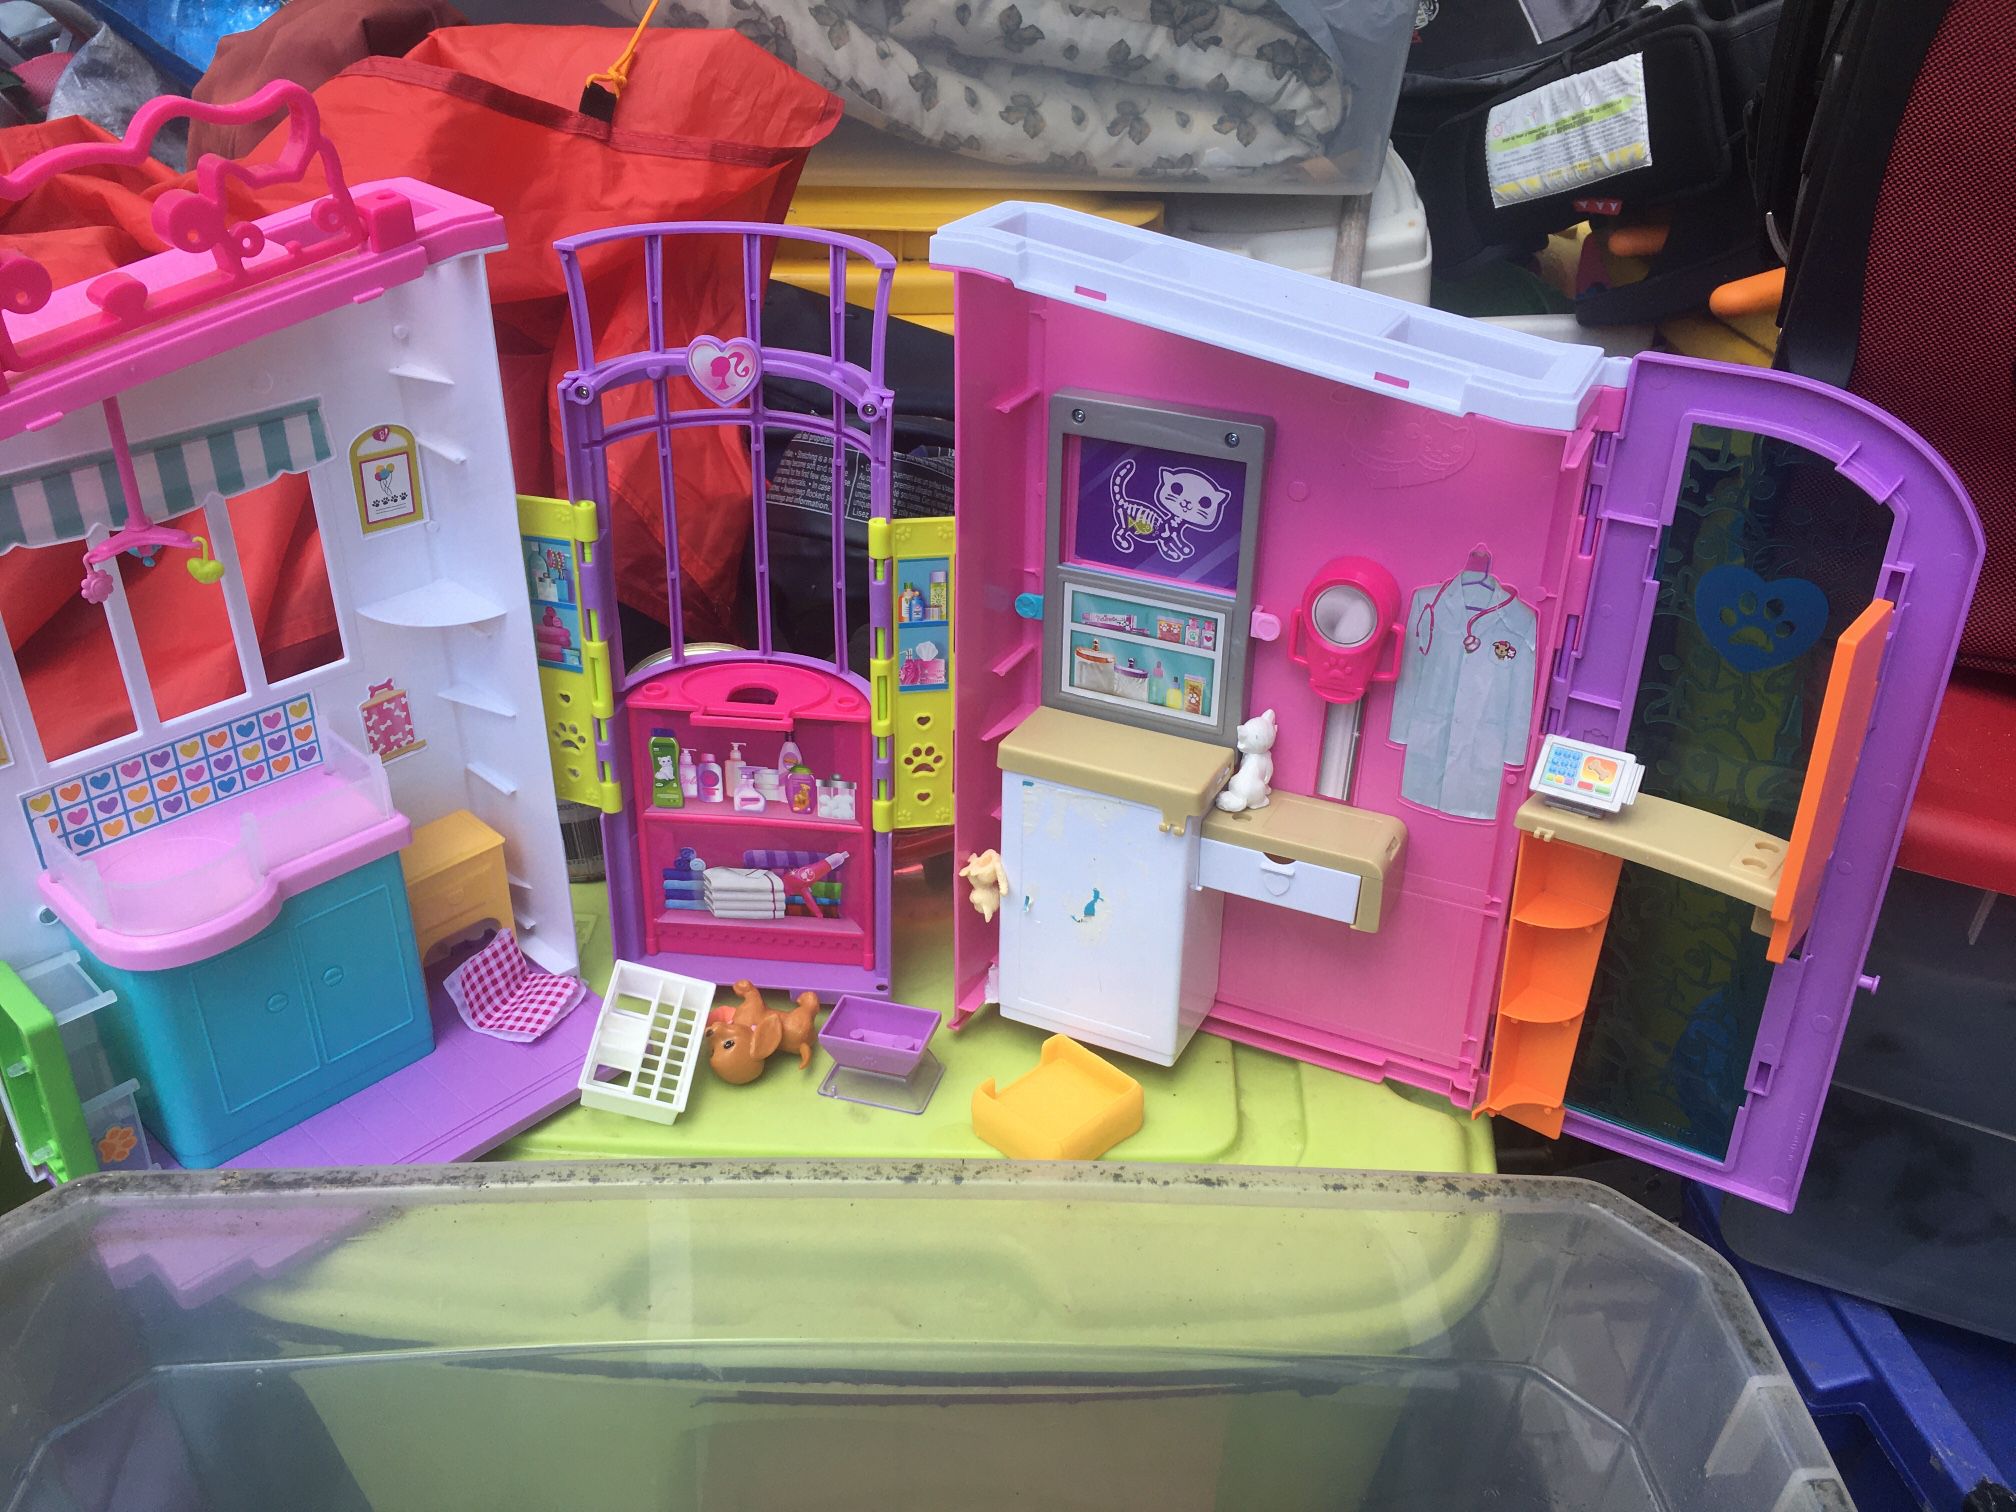 Barbie plane beach house car furniture dolls clothes etc. everything goes for $75